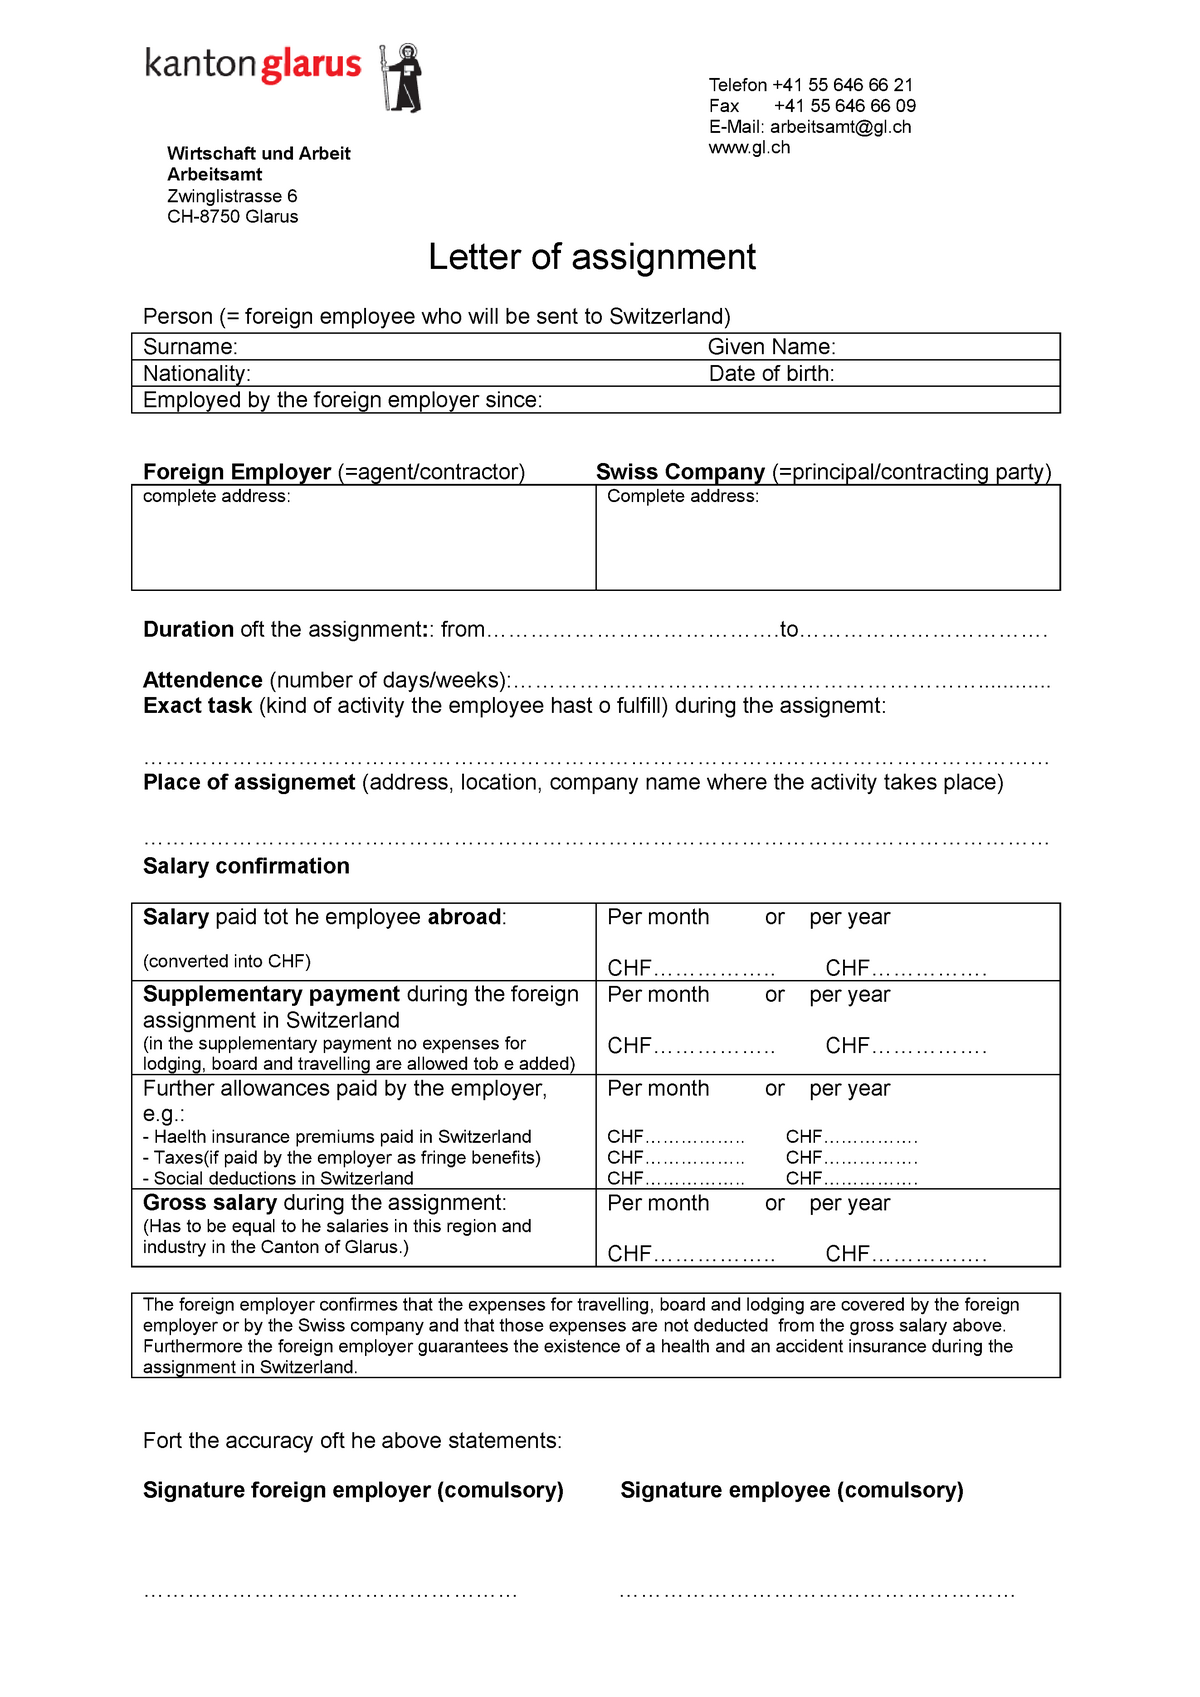 ultimate duty assignment letter